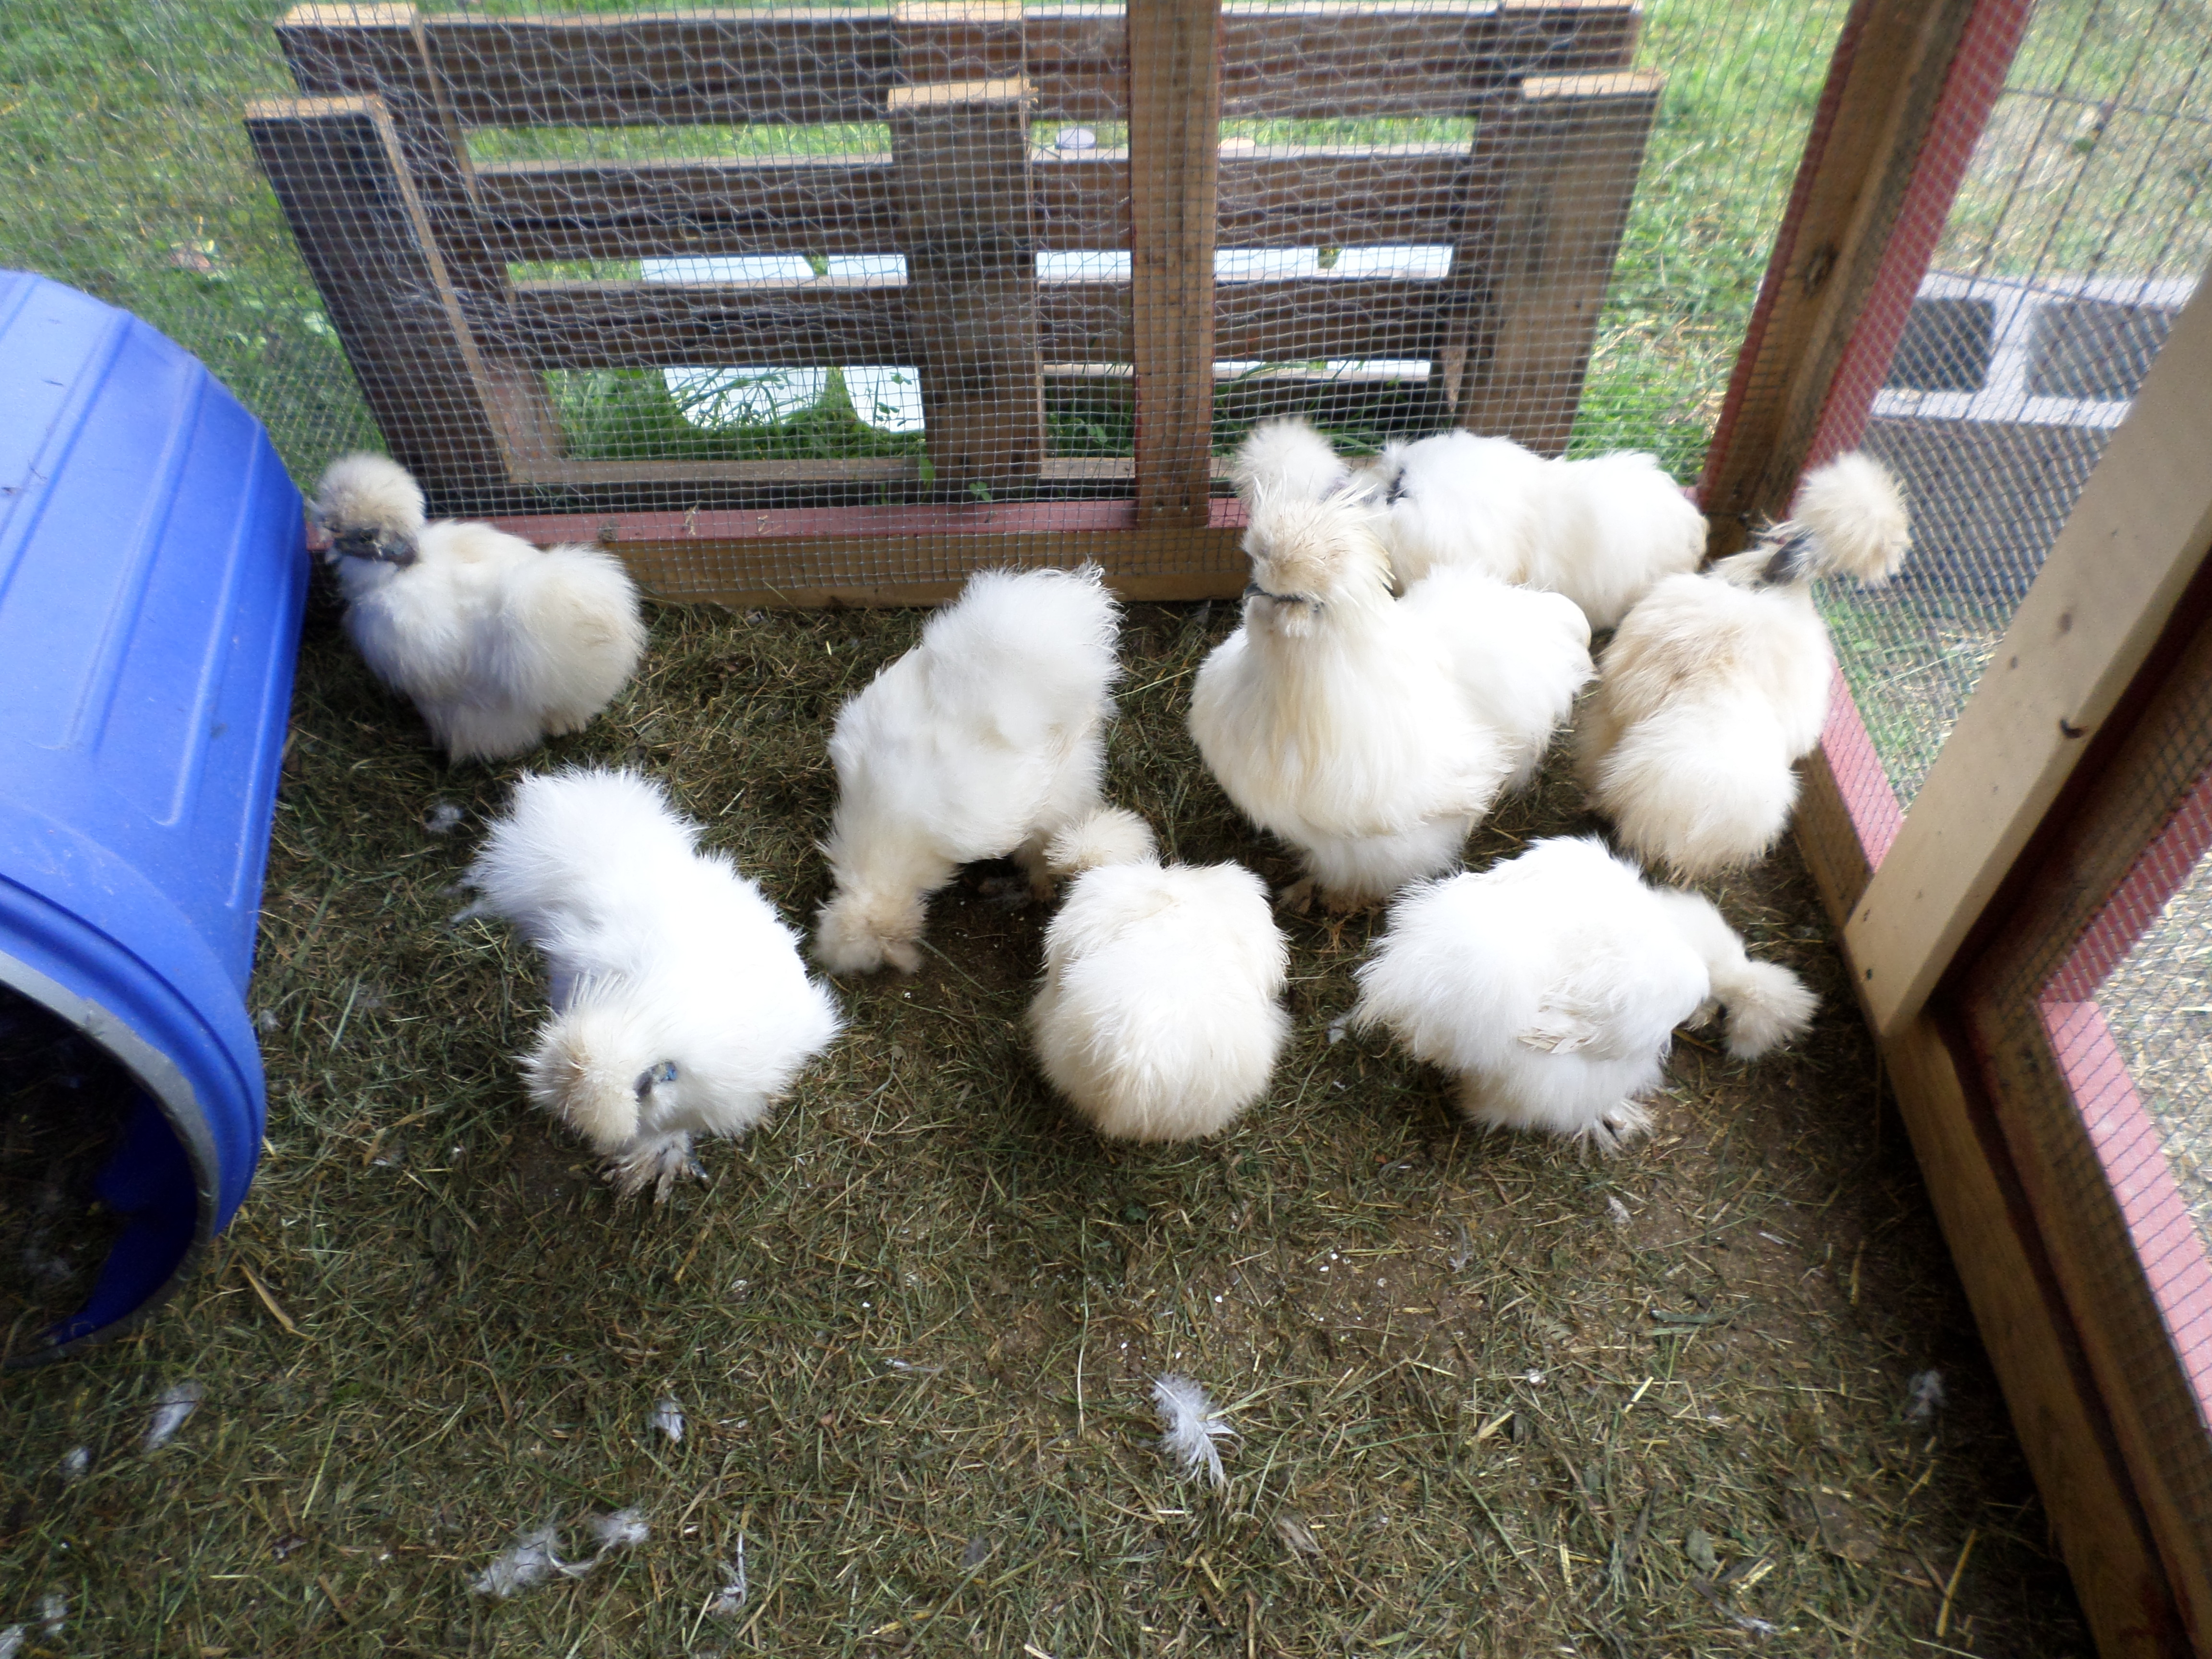 Some of my white Silkies and Showgirls